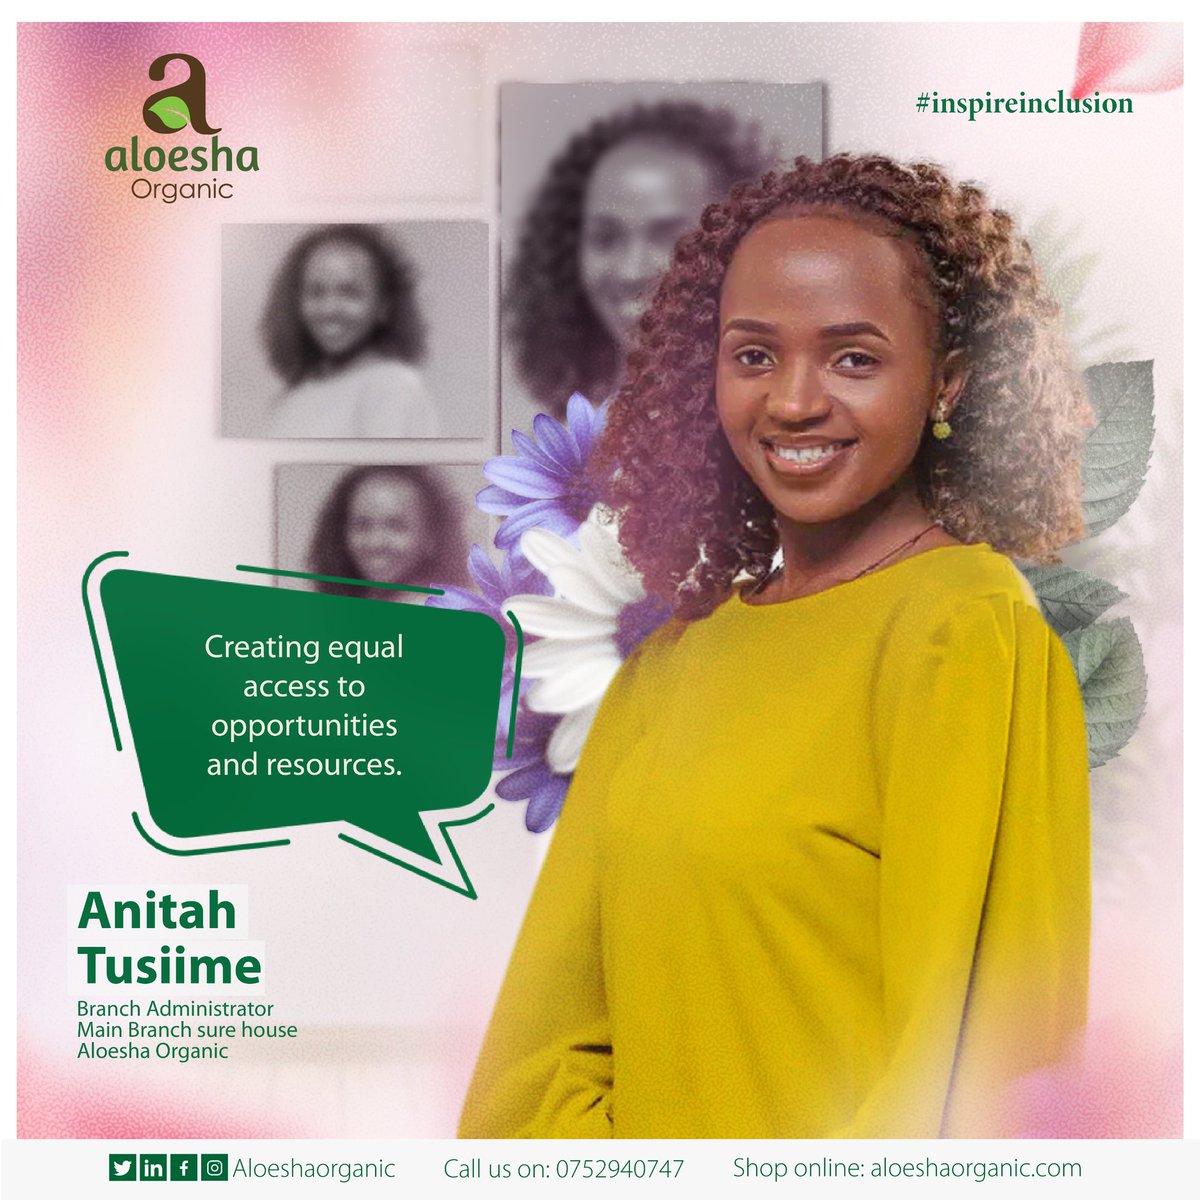 Good morning! Wednesdays are for celebrating women of substance. #WCW

 Anitah Tusiime, our Administrator, advocates for equal distribution of resources between men and women.

 Have a great Wednesday! 🤗
#herbalife #InspireInclusion